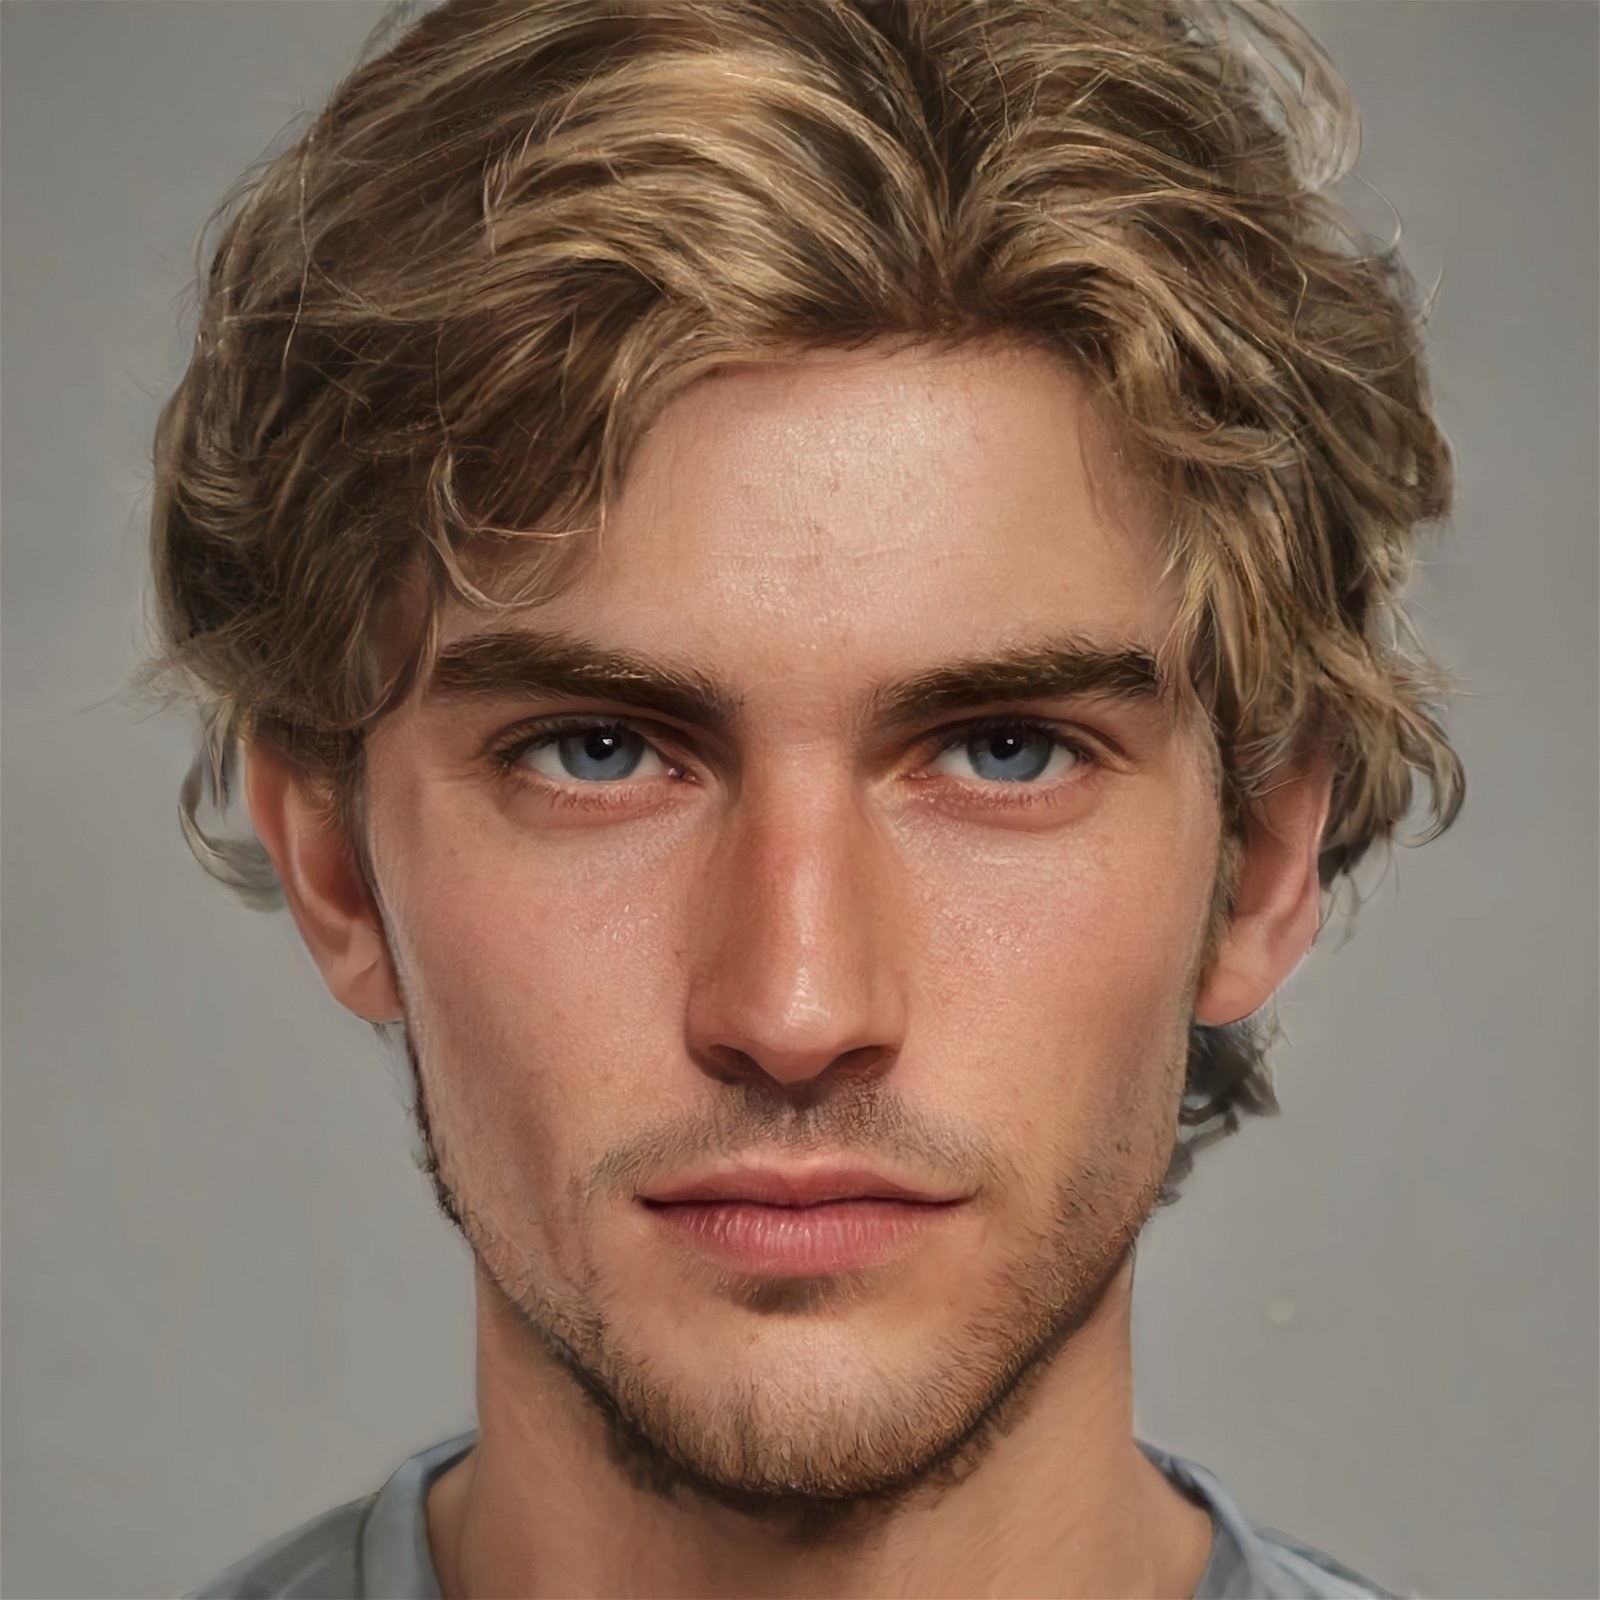 a character with wavy blonde hair and sea blue eyes